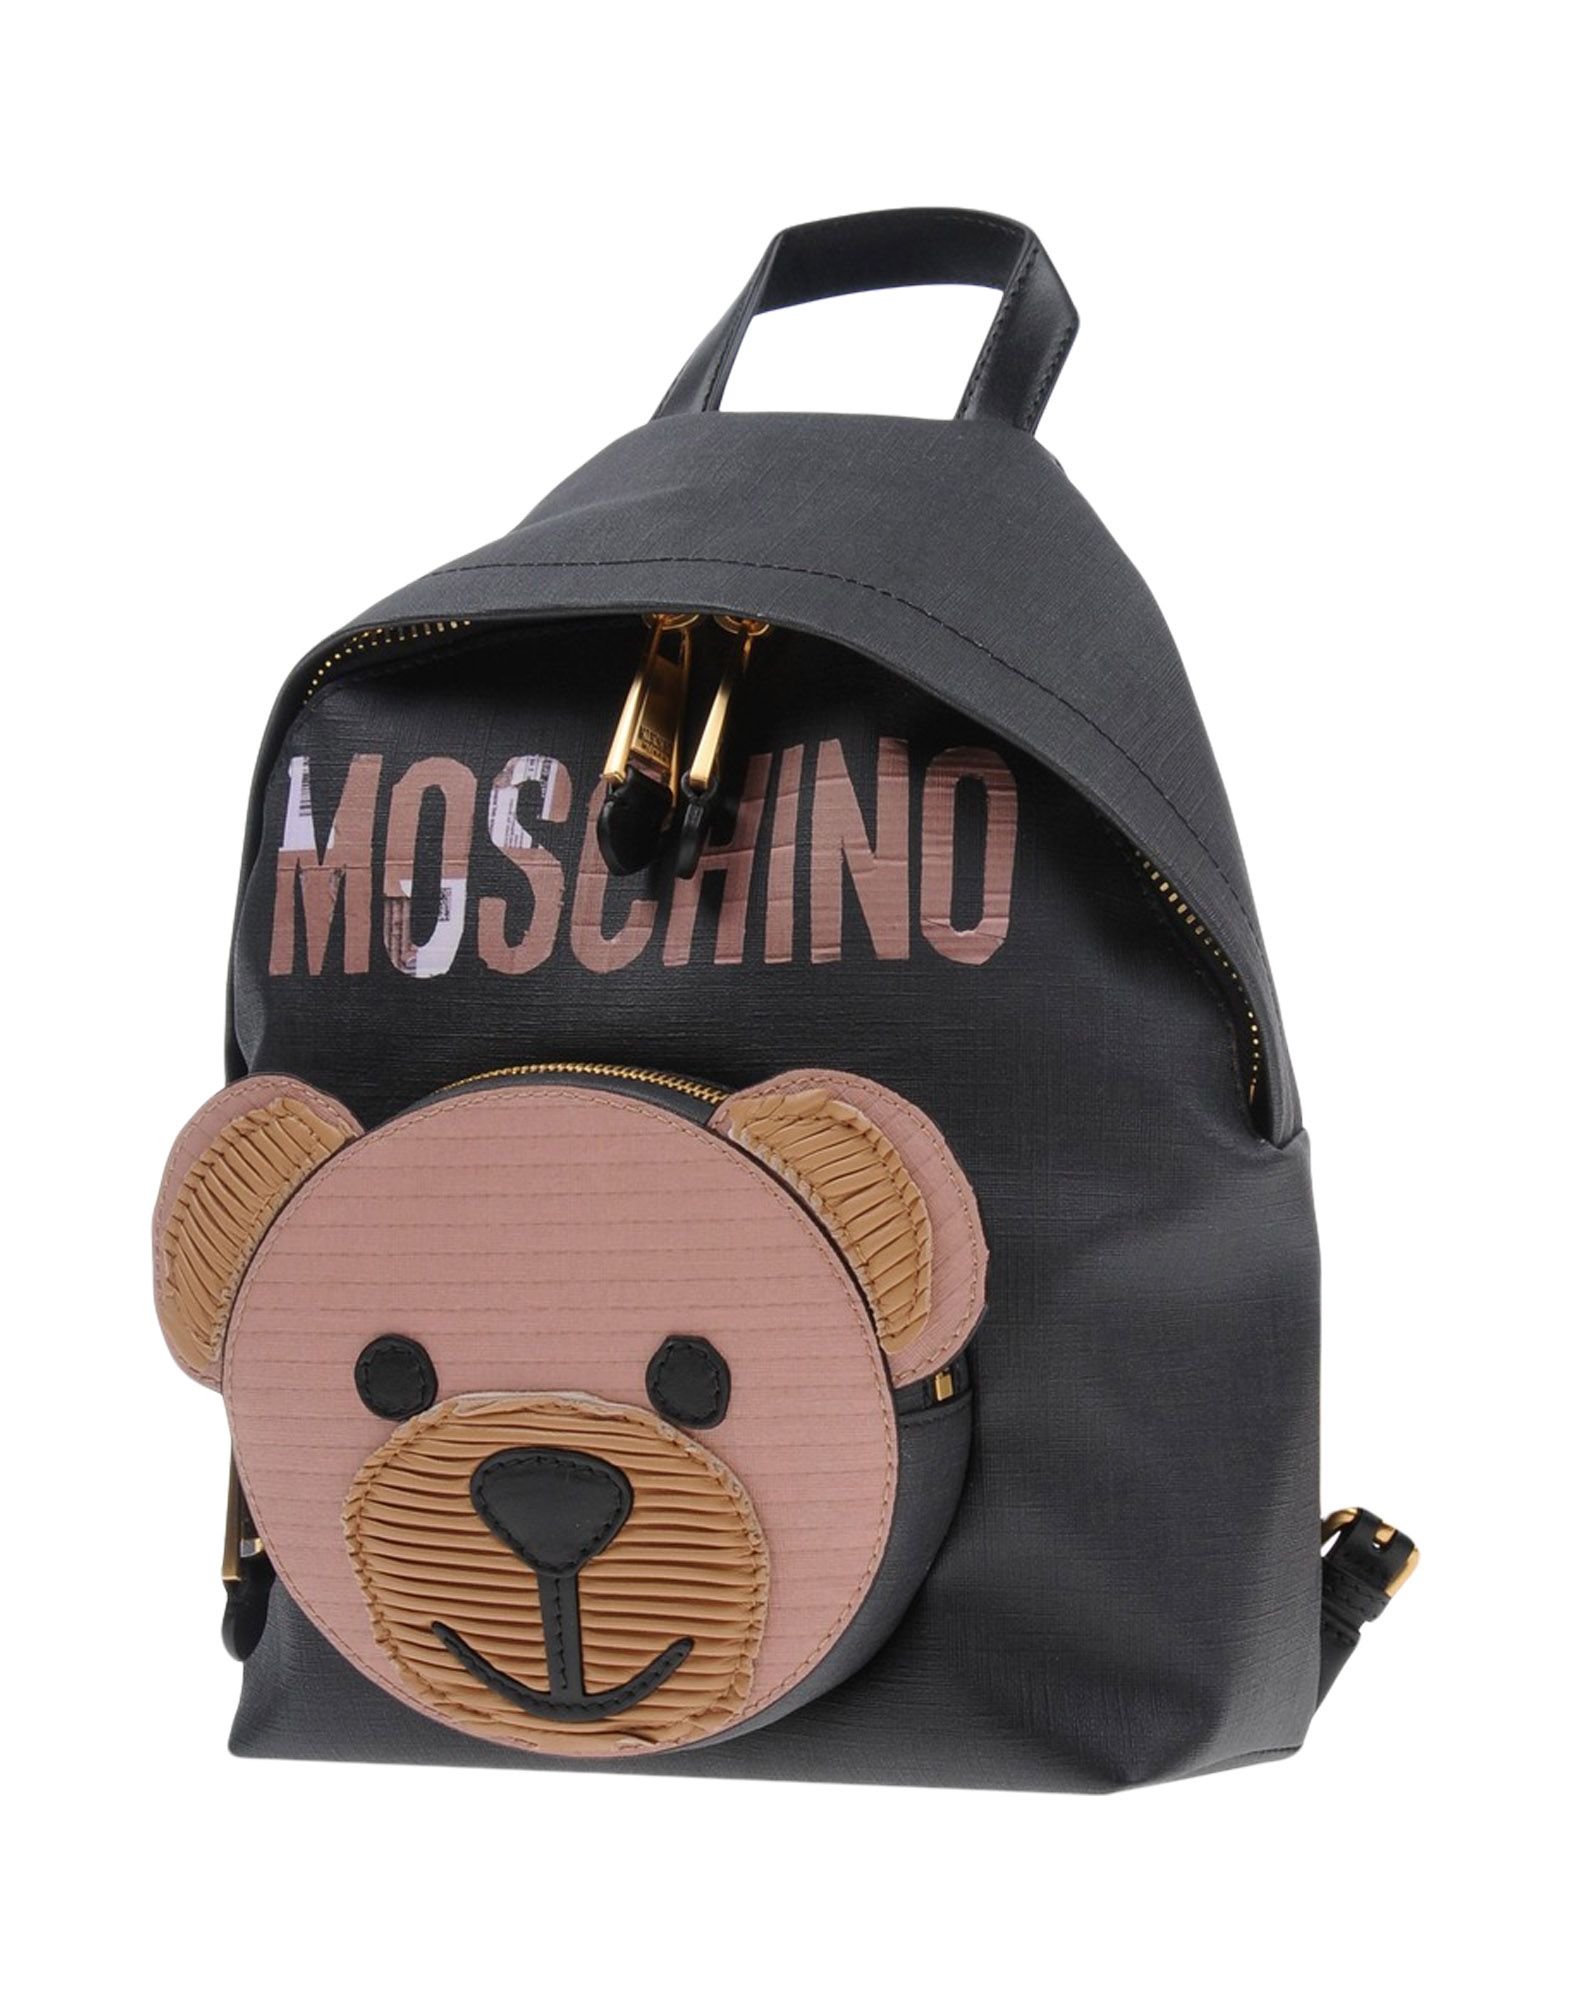 MOSCHINO Backpack & fanny pack,45399258AJ 1